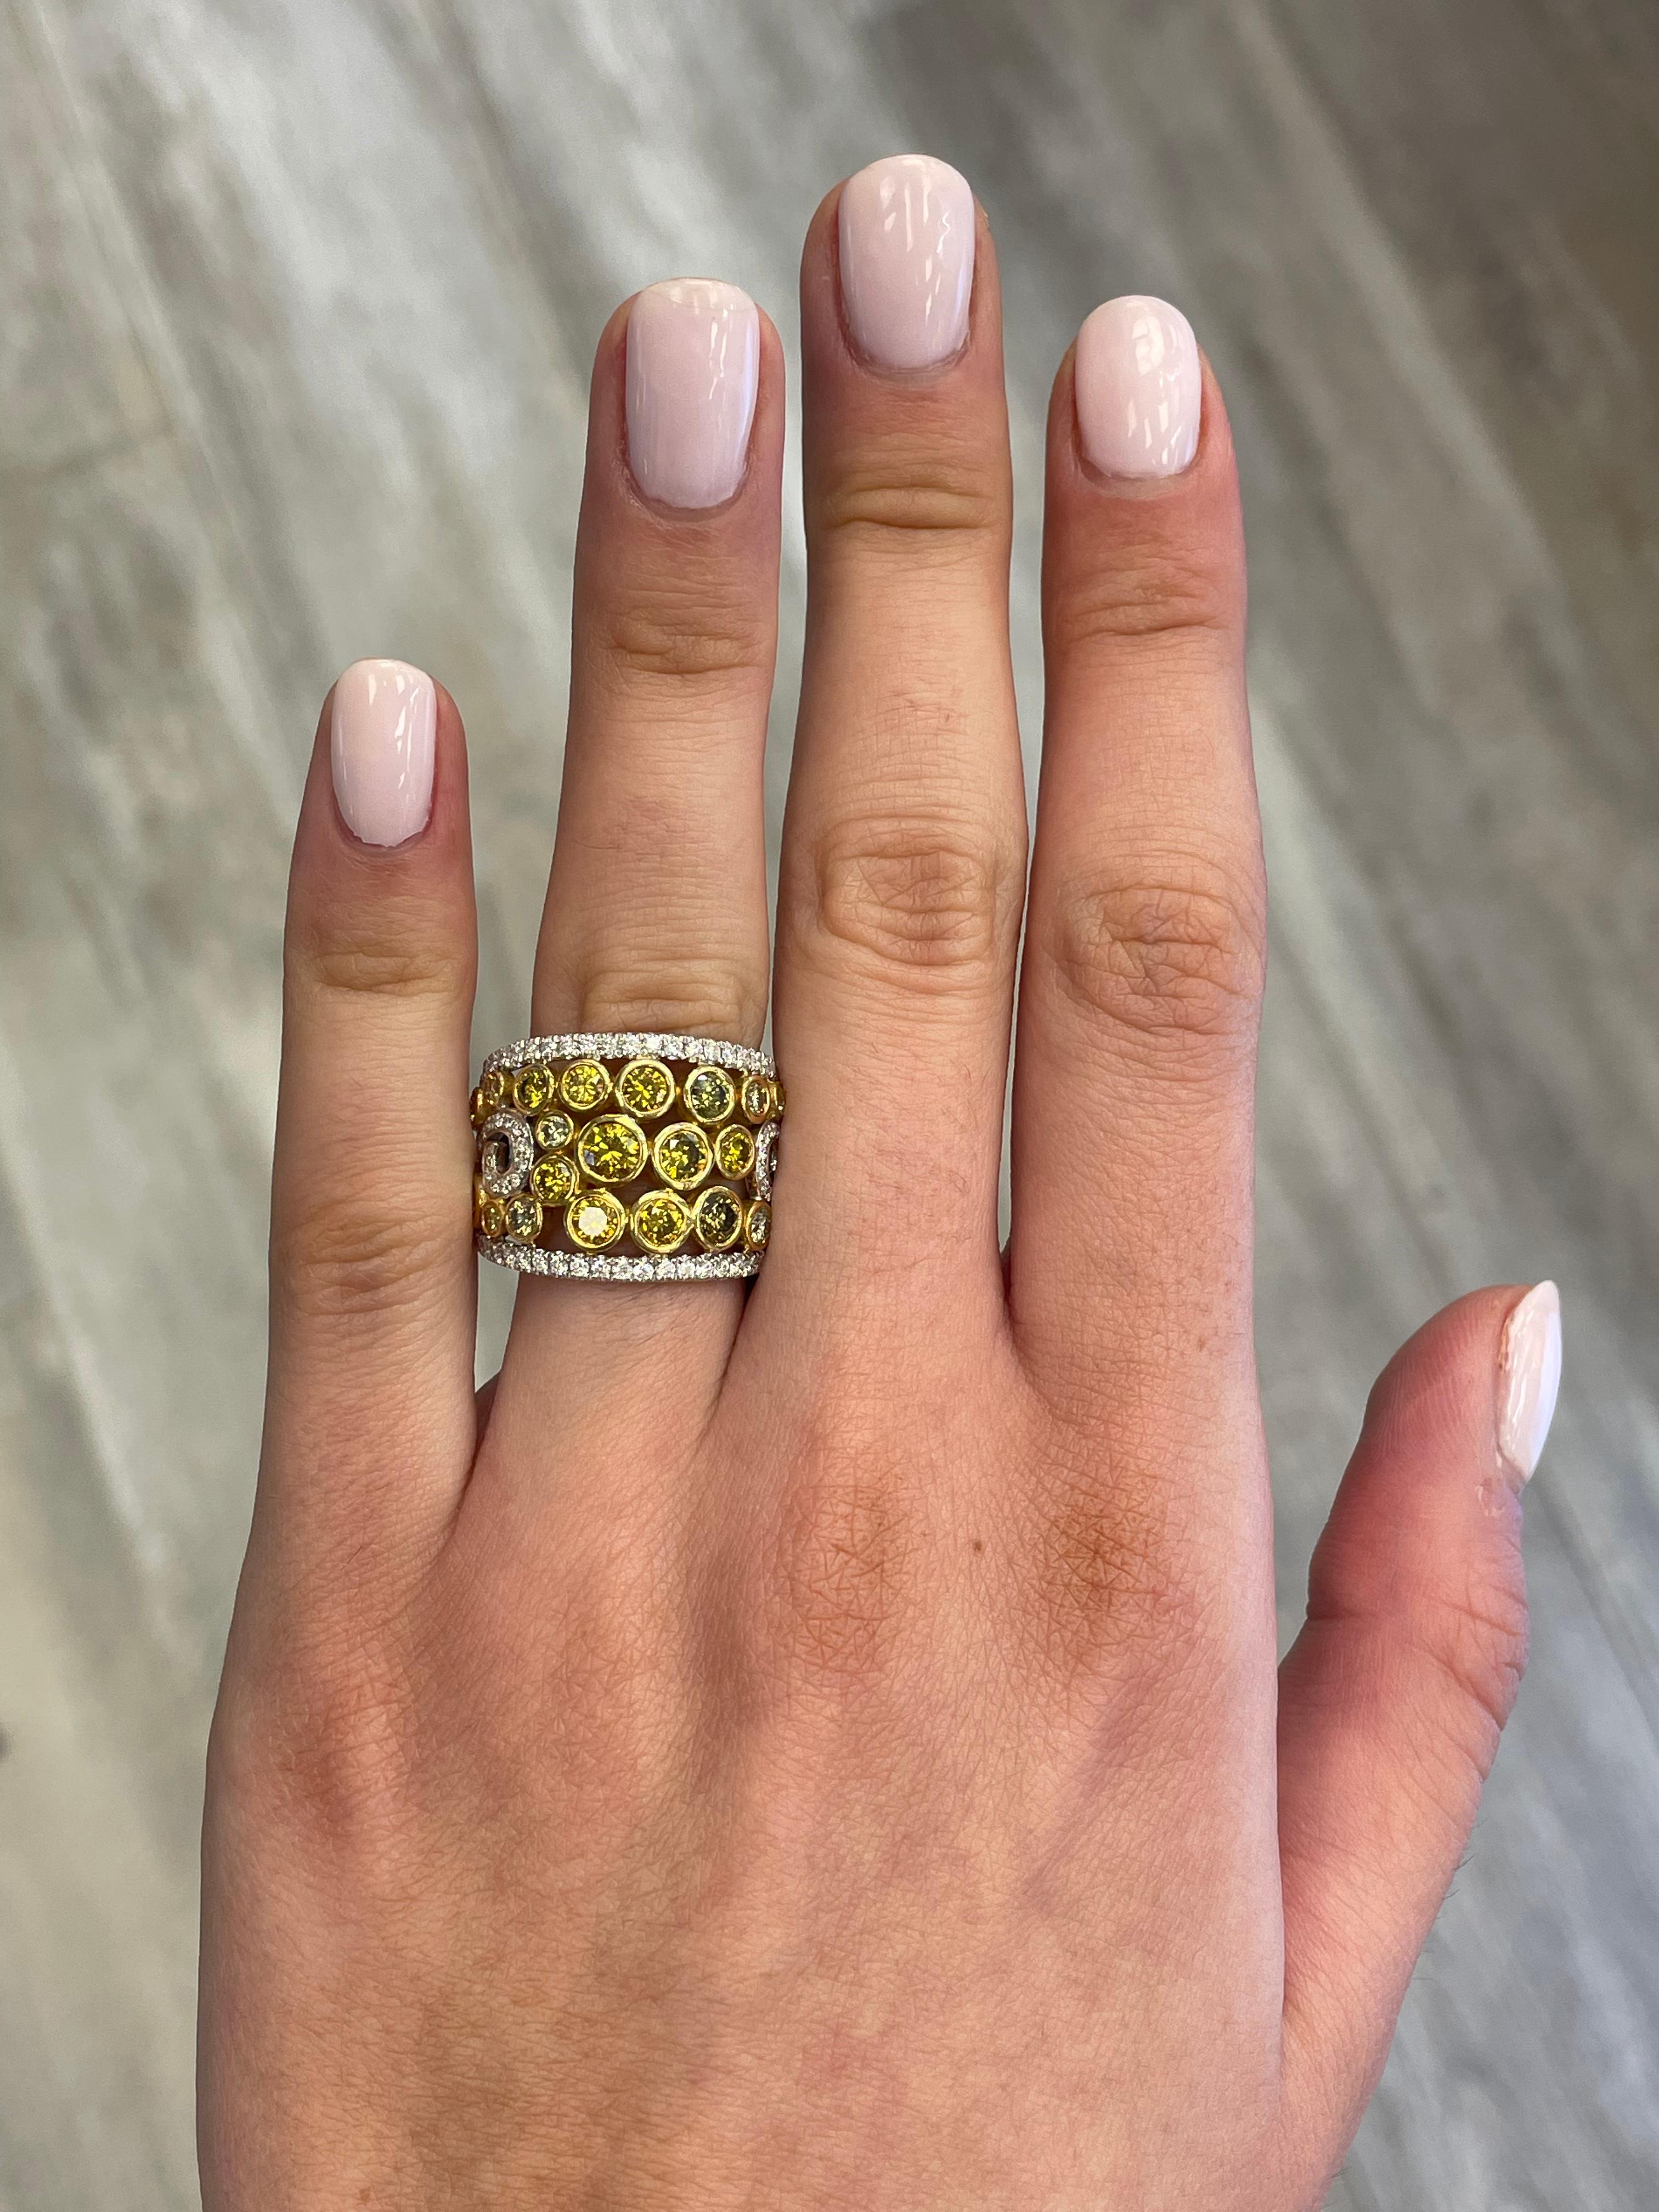 Stunning bezel set multi yellow diamond ring with two rows of round diamonds, by Alexander Beverly Hills. 
3.55 carats total diamond weight.
23 round diamonds ranging from approximately fancy brownish yellow to fancy light yellow, 2.64 carats. 134